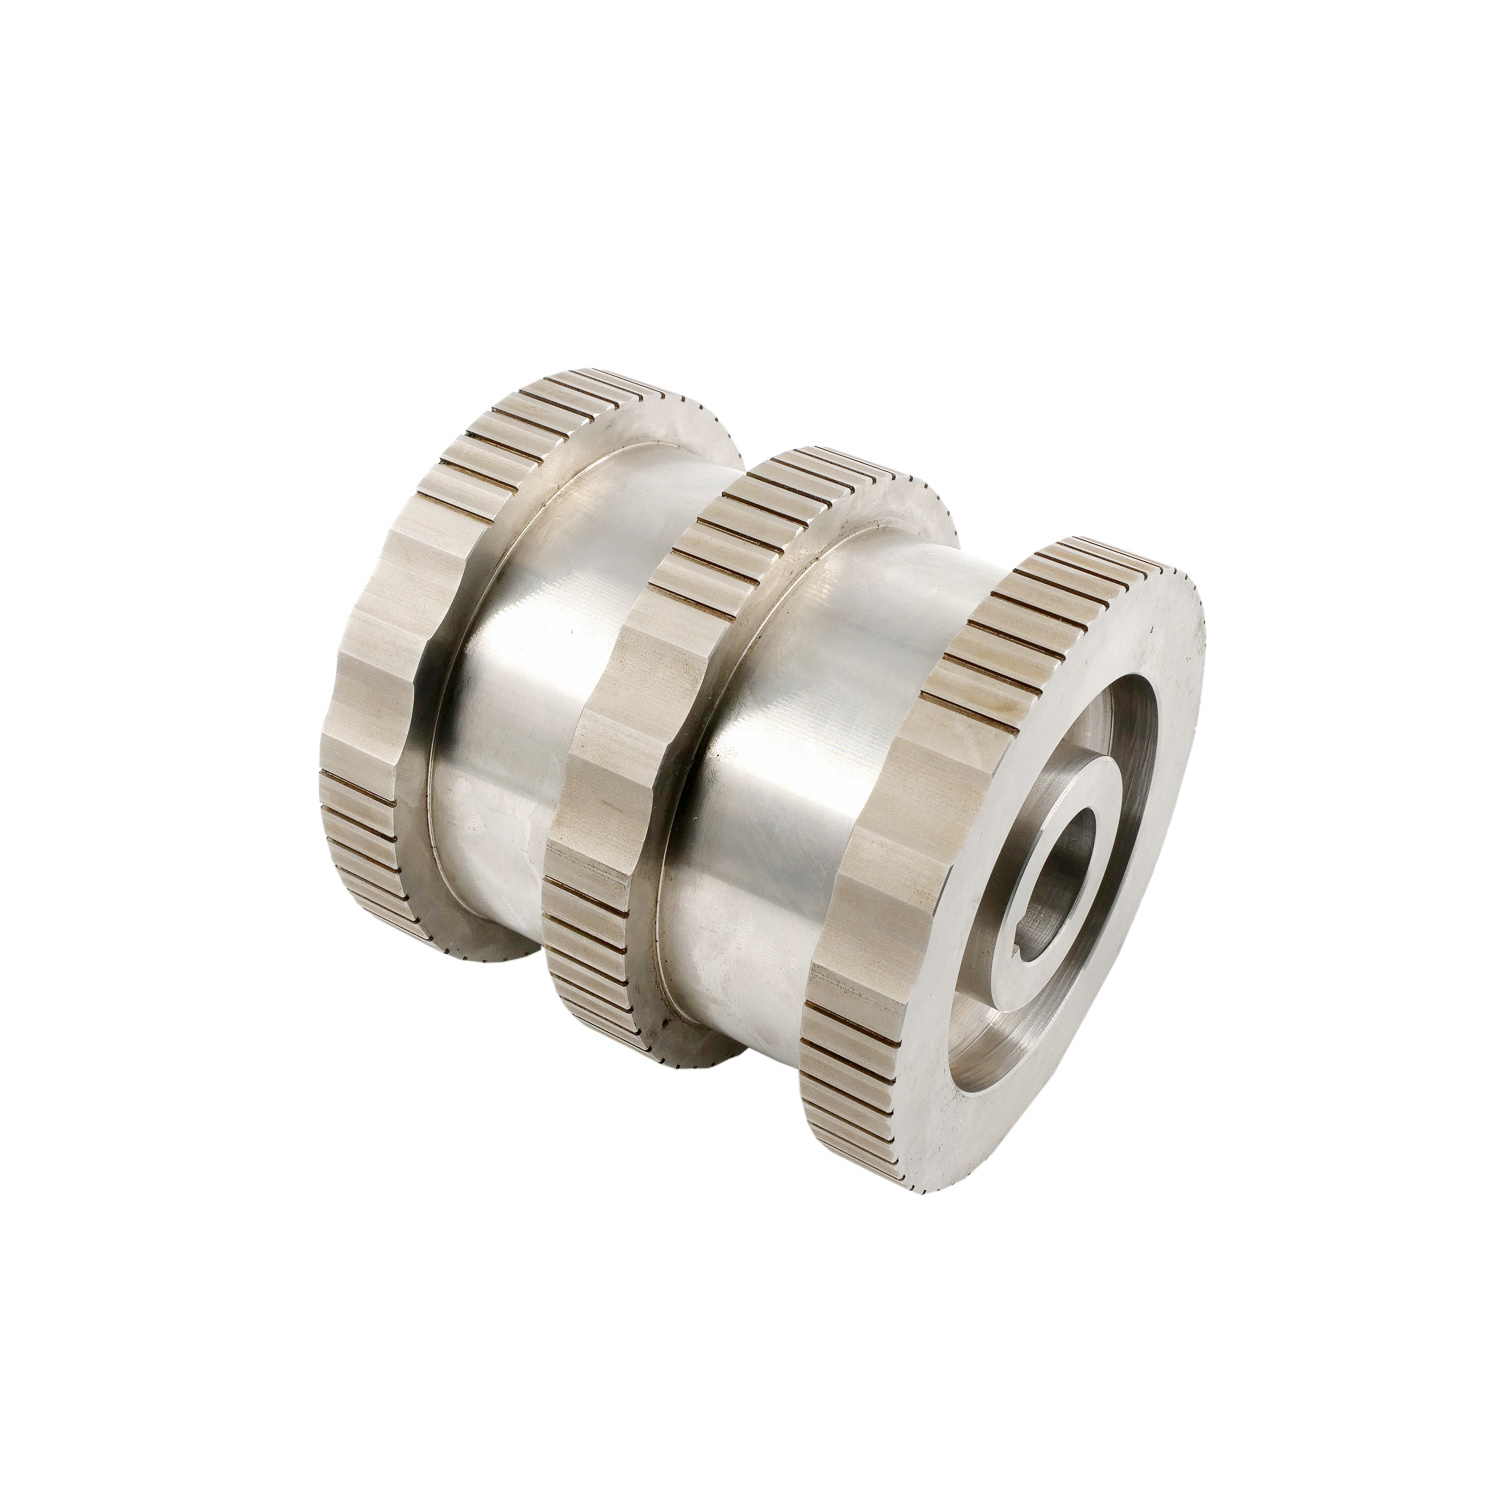 Medical Industry Spare Part OEM Cnc Lathe Machining Brass Fittings Thread Insert Grease Nipple Pipe Connector